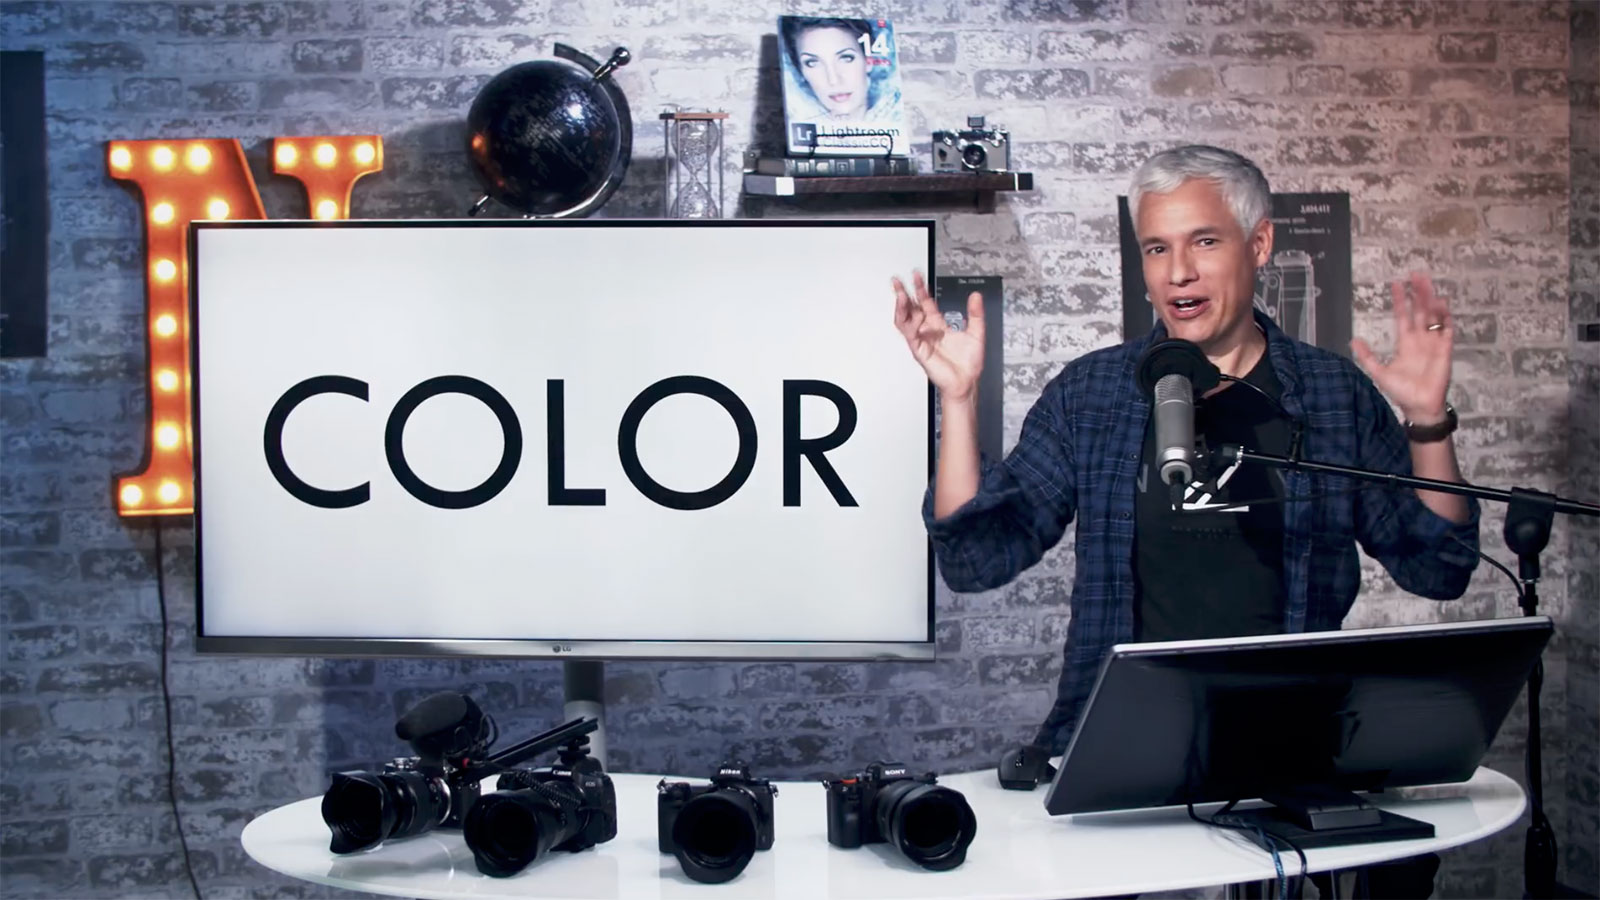 Tony Northrop: Which Camera Brand has the Best Color Science